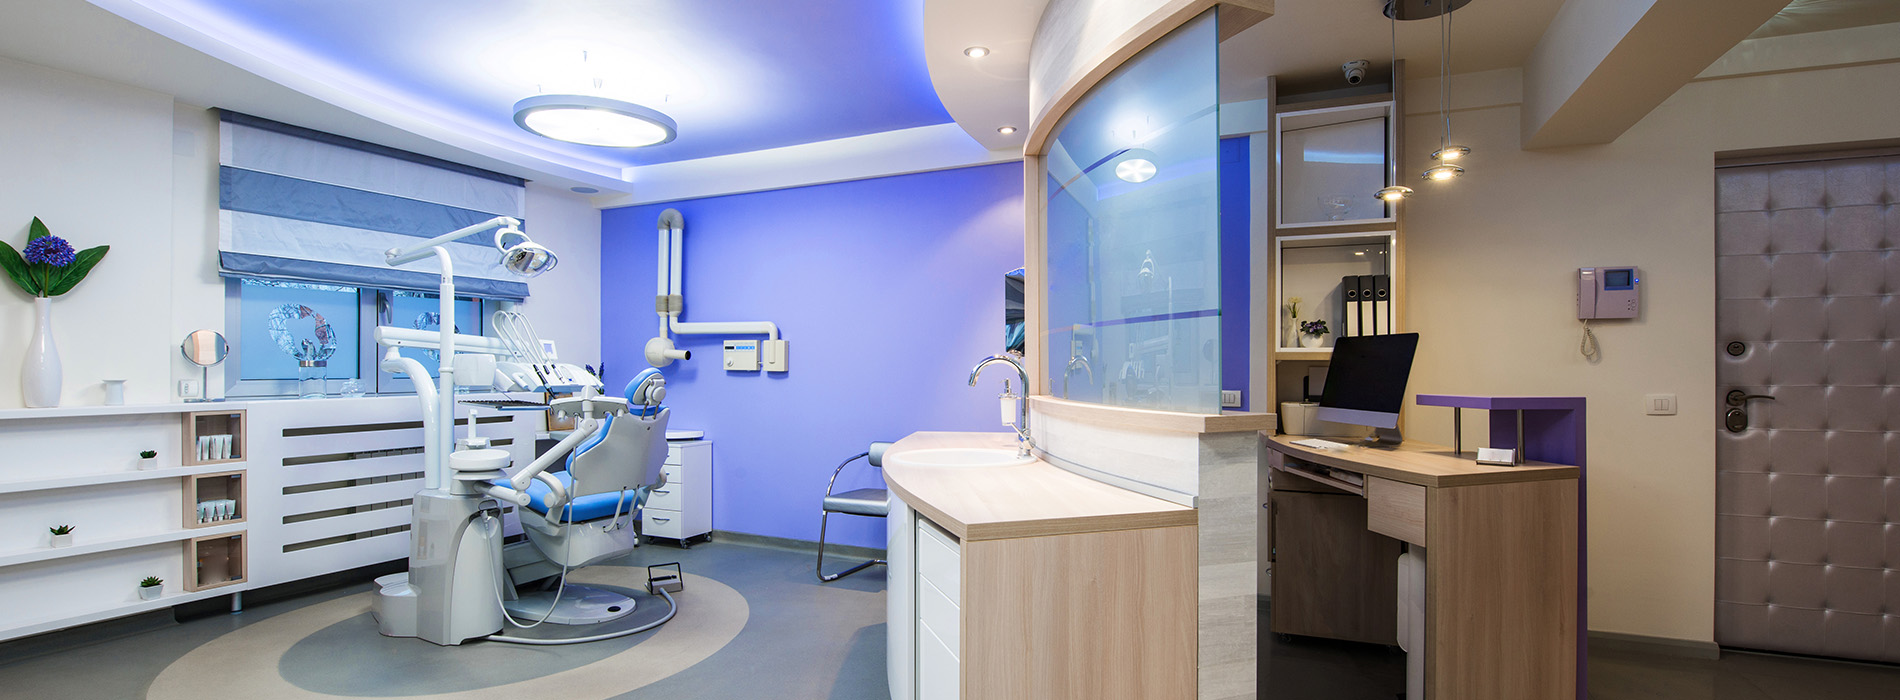 A collage of a modern dental office interior, showcasing equipment and furniture.